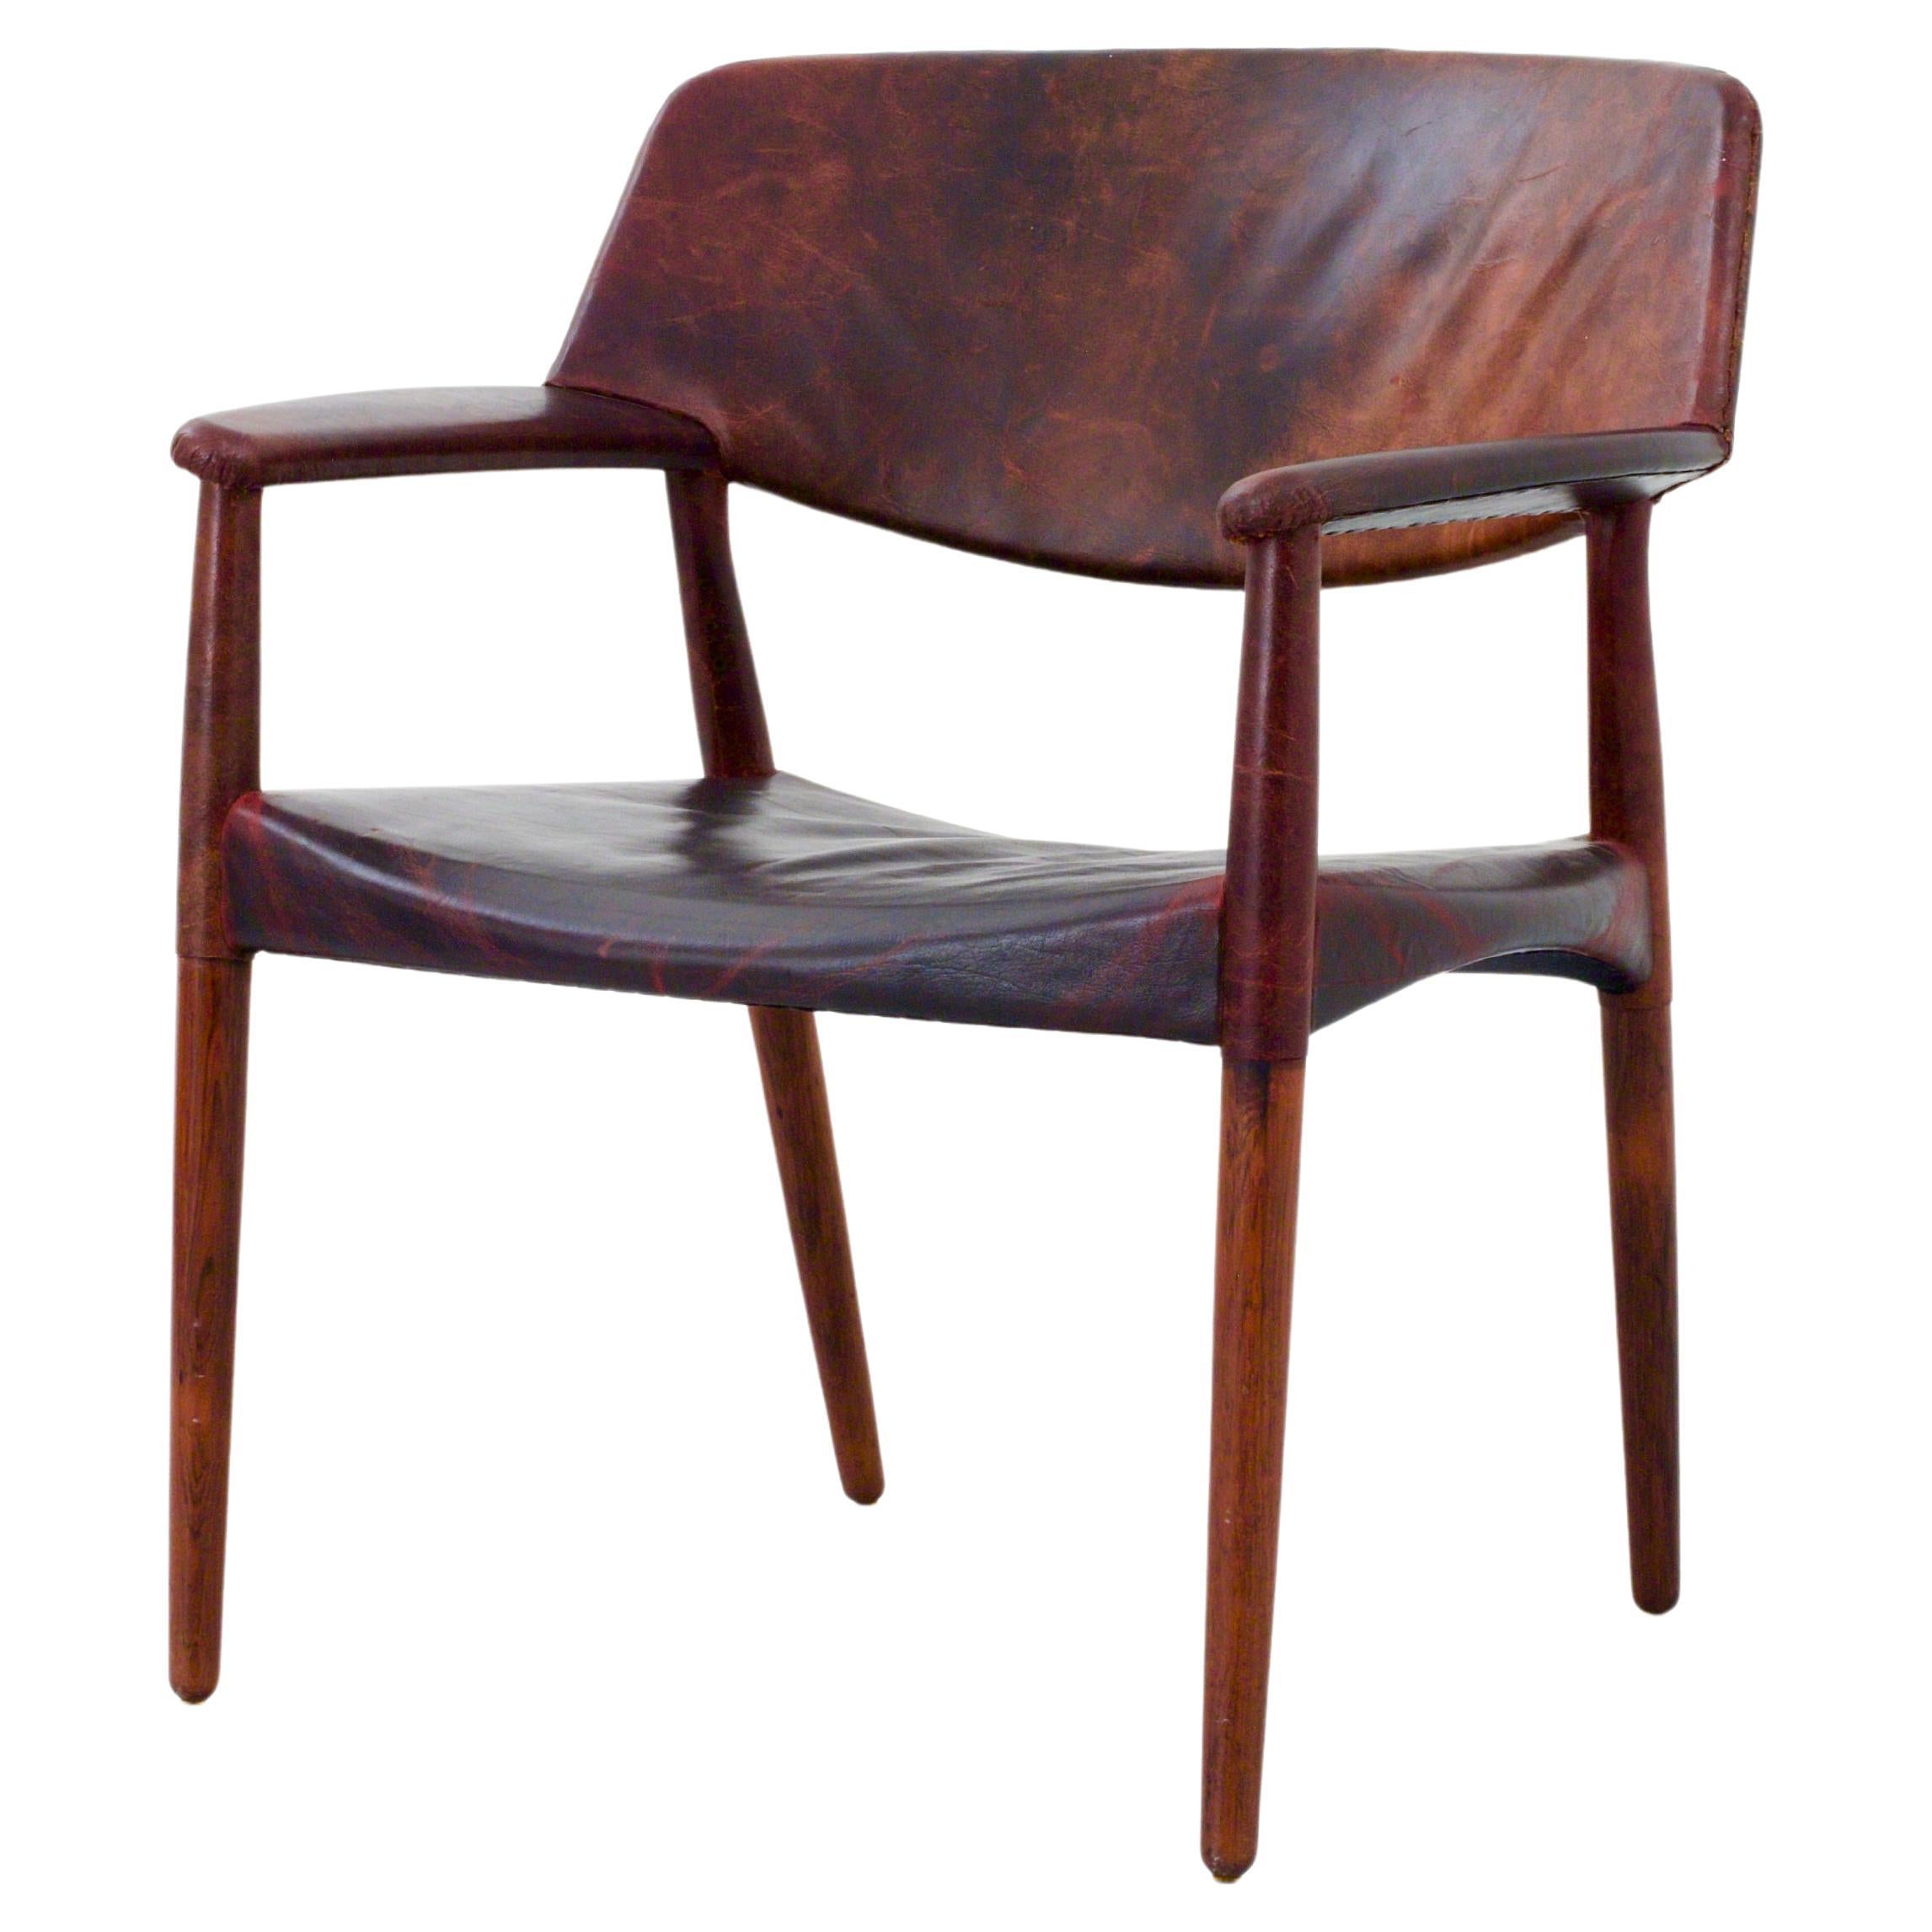 Armchair by Larsen and Madsen in Leather and Wood by W. Beck, Denmark, 1950 For Sale